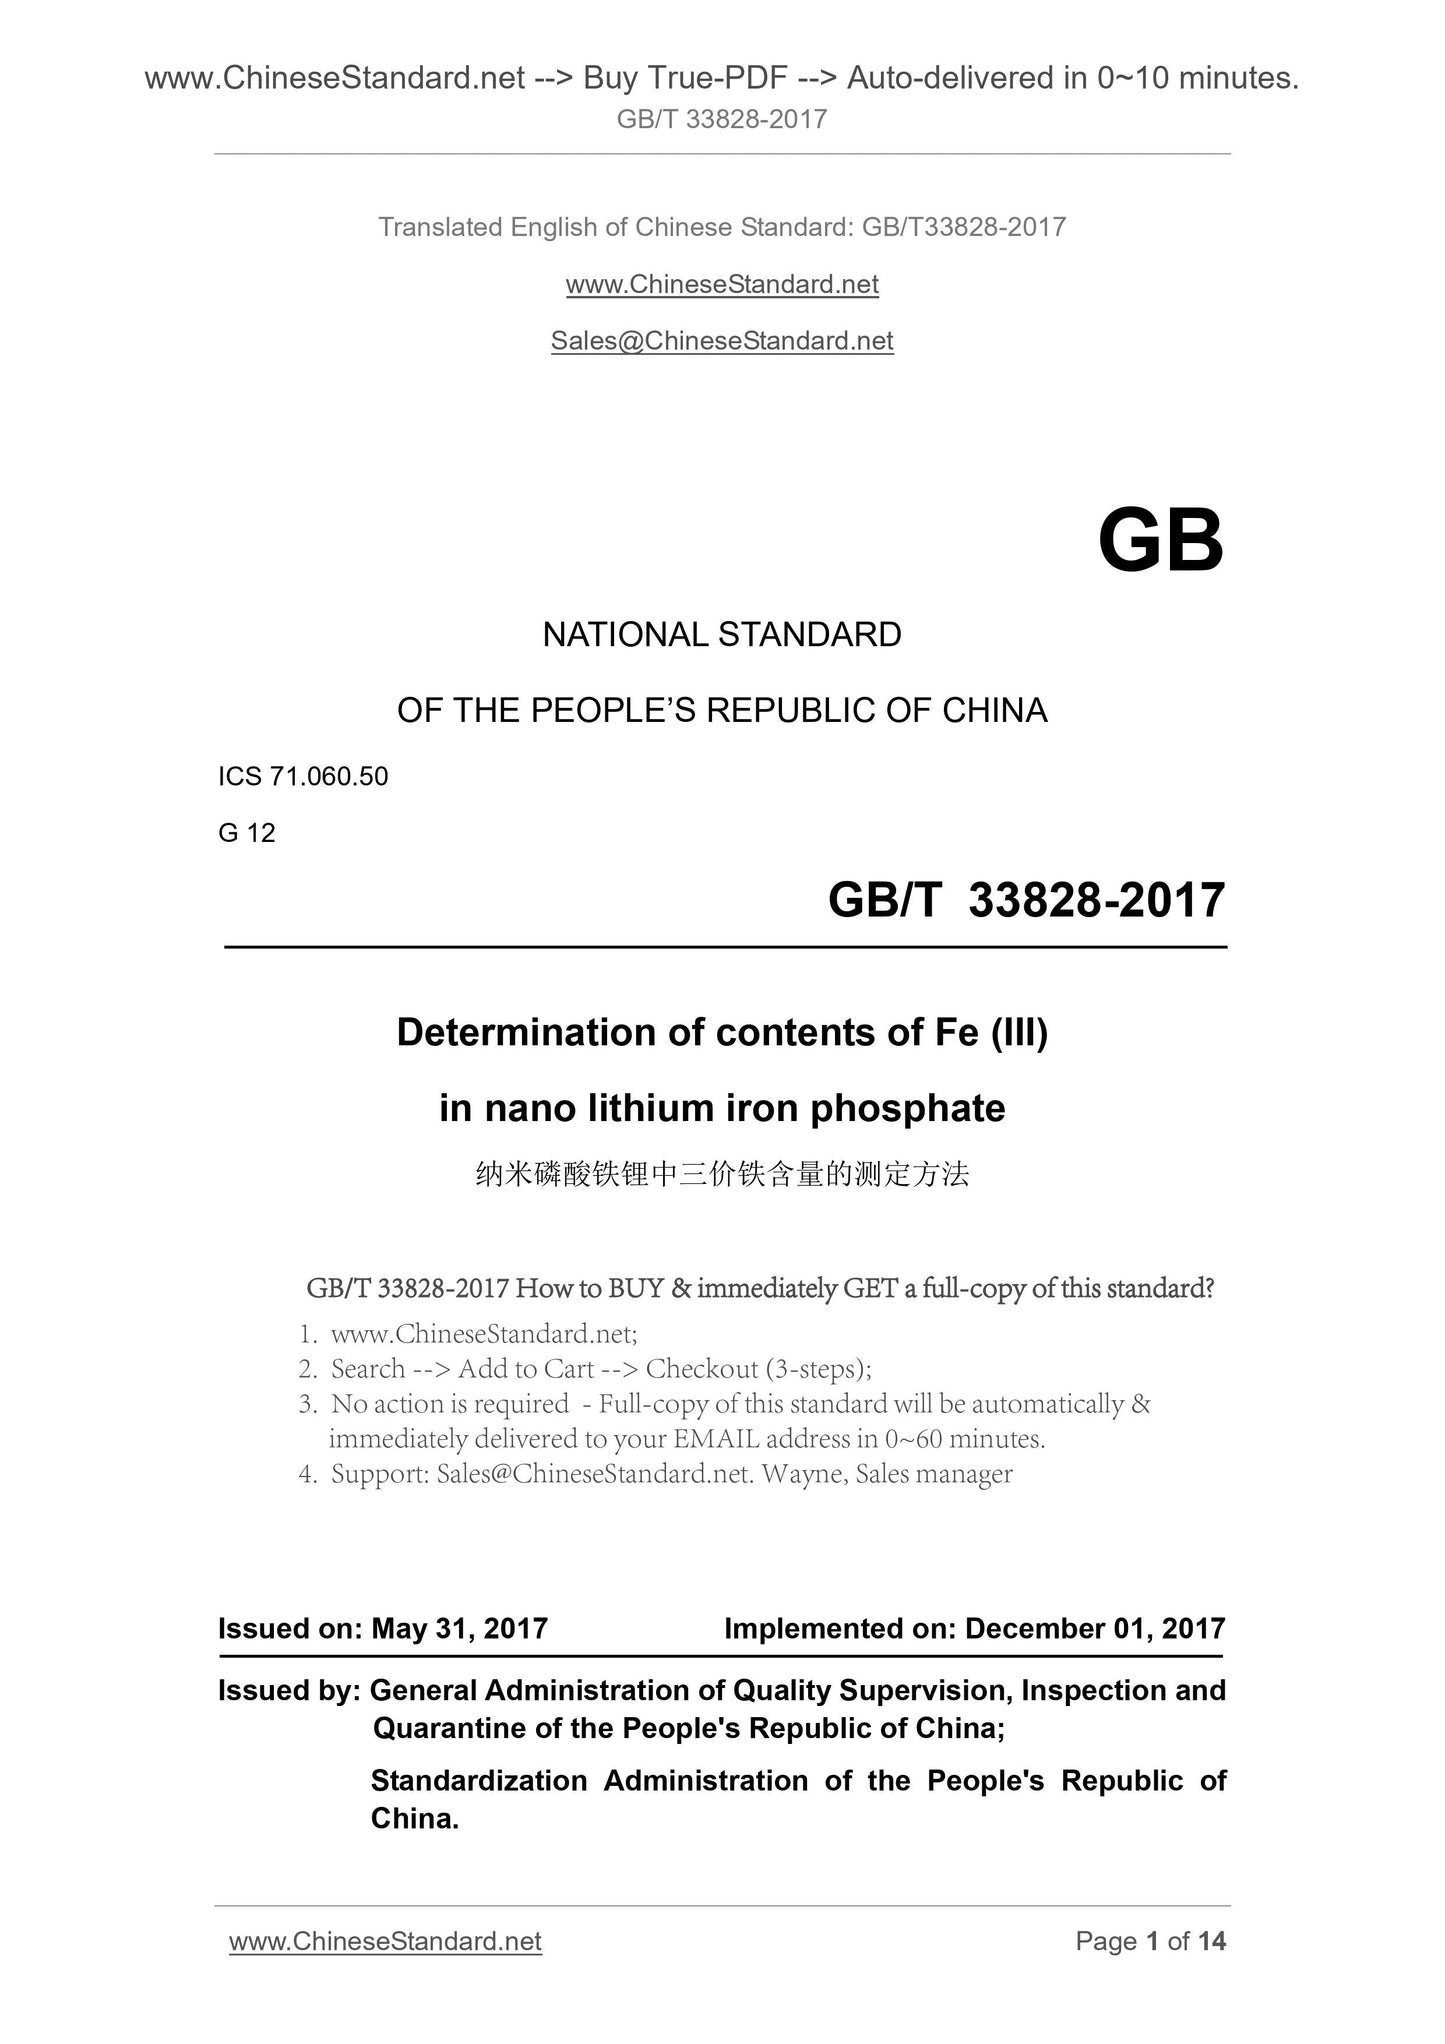 GB/T 33828-2017 Page 1